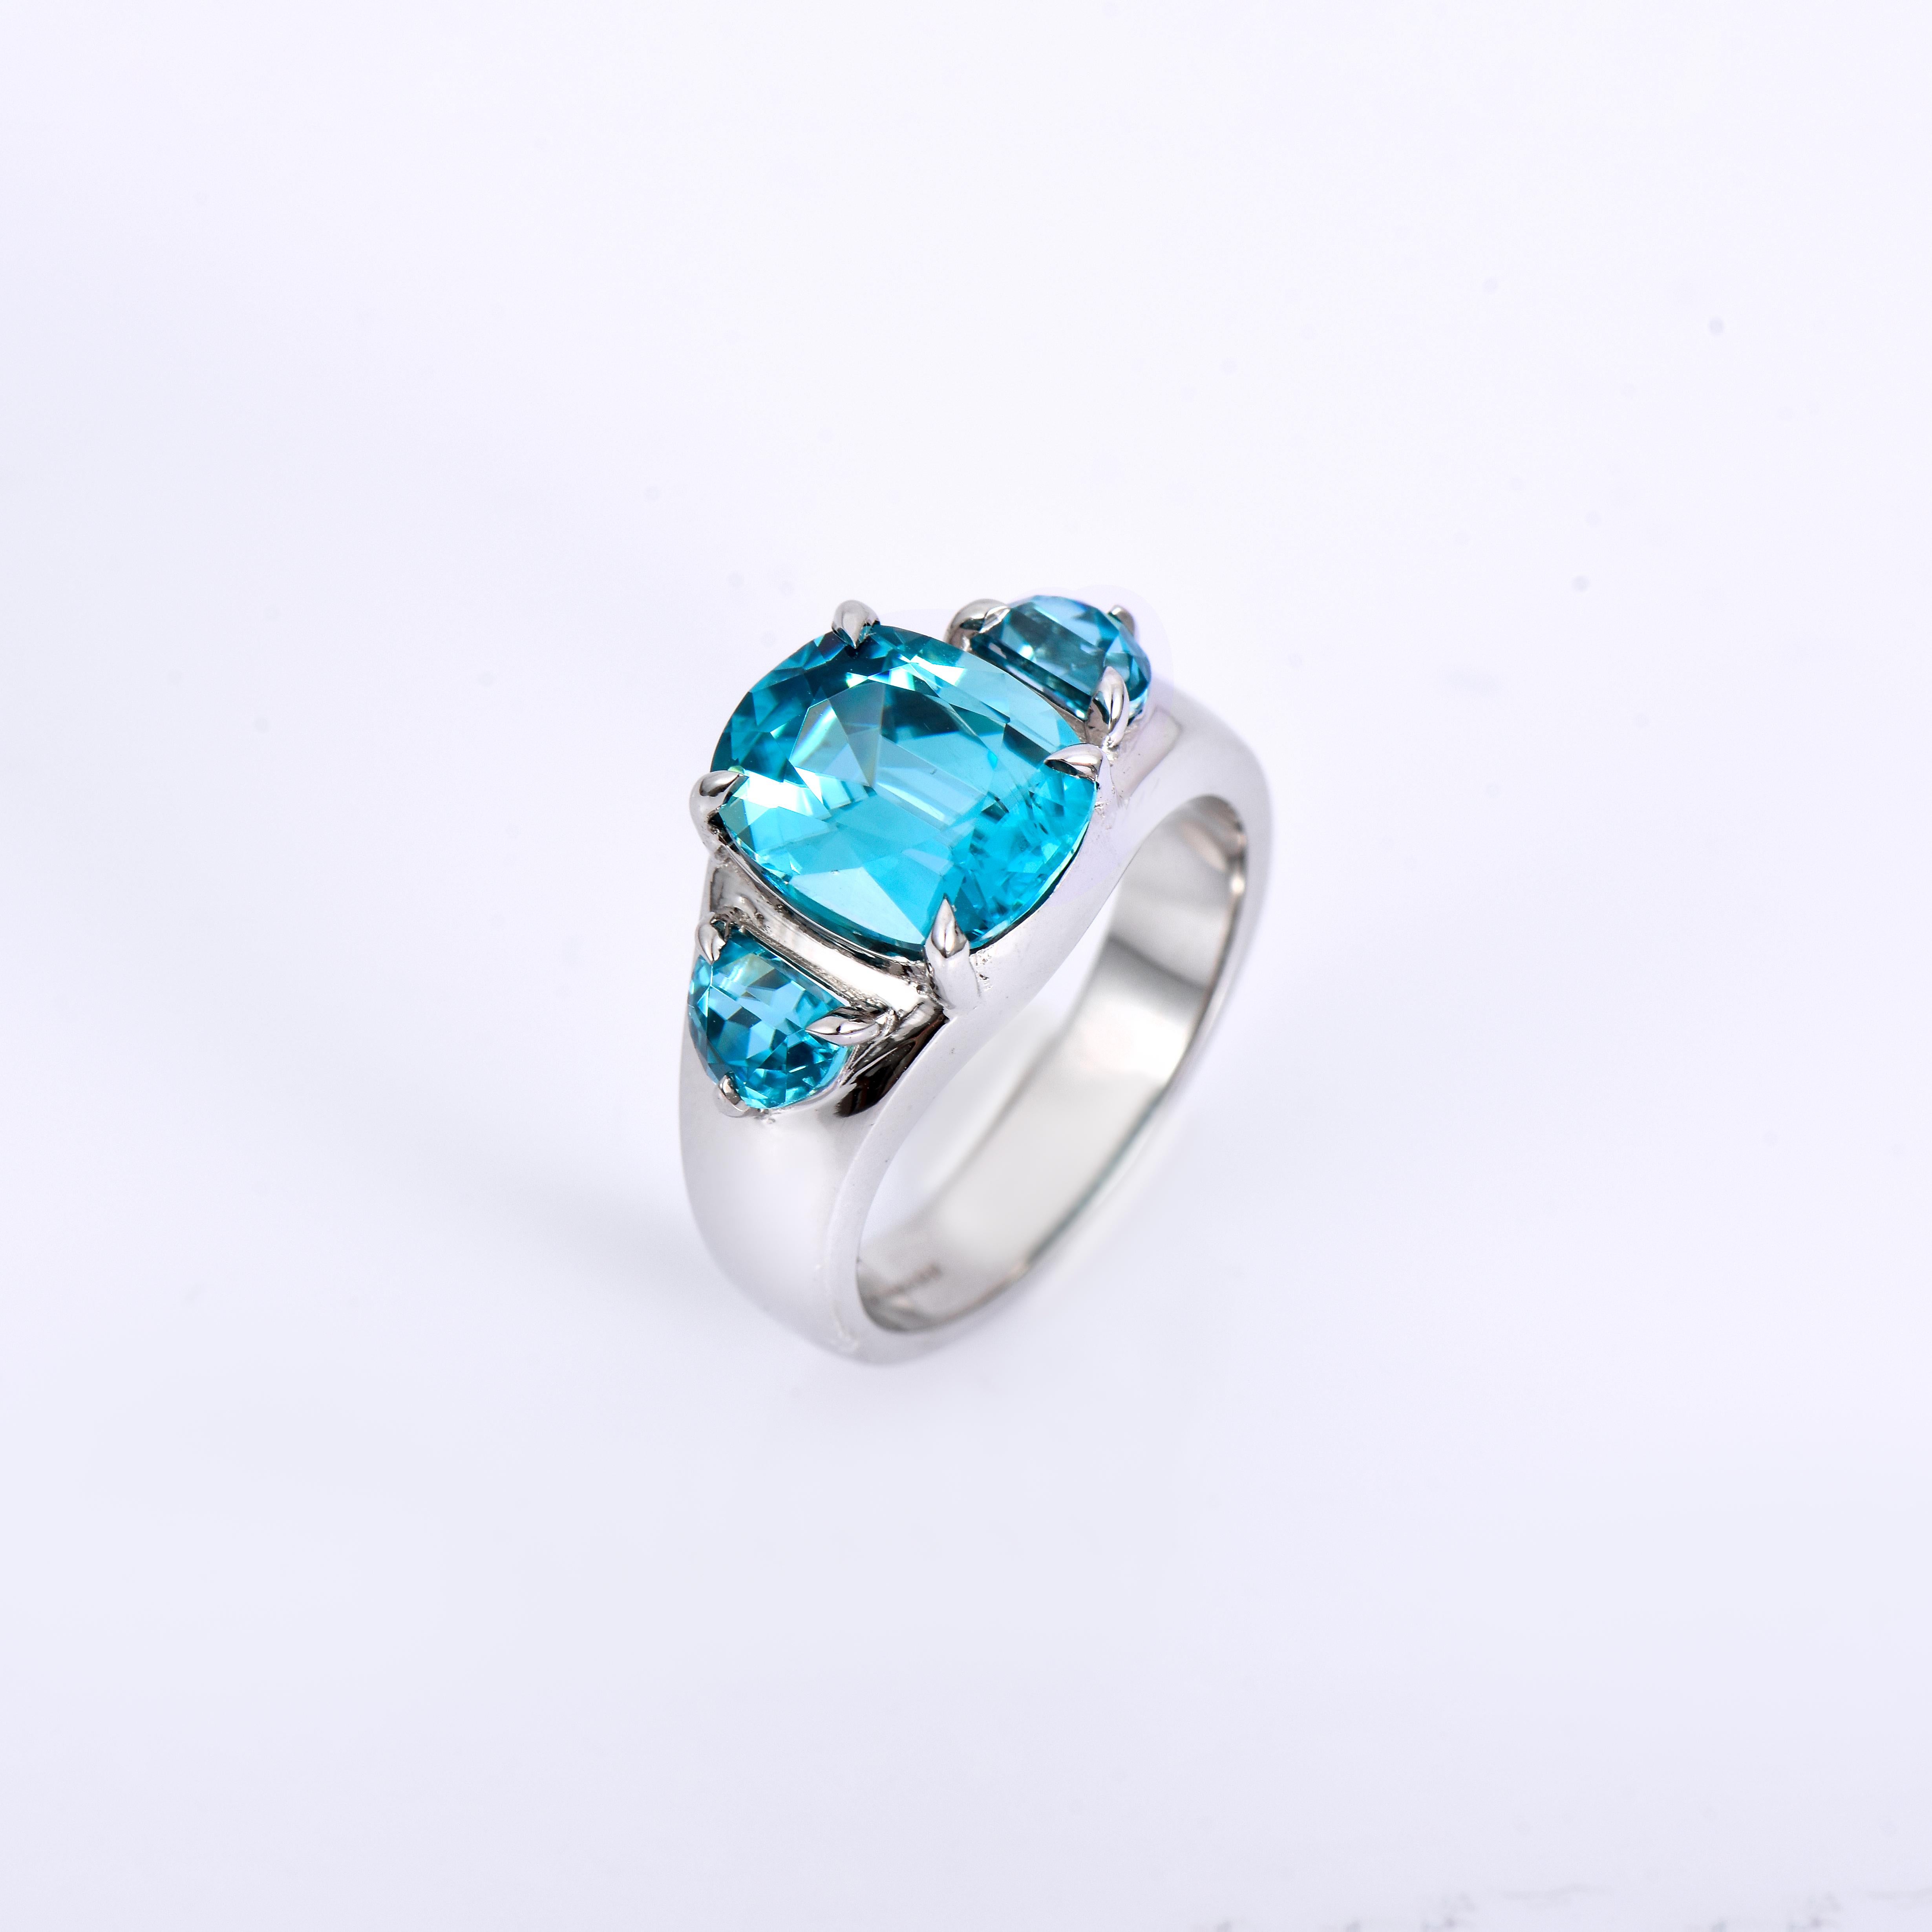 Orloff of Denmark; 925 Sterling Silver Ring set with three Natural Cambodian Blue Zircons totaling to 7.52 carats.

This handcrafted 925 sterling silver ring features a central blue zircon with two complementing half-moon side stones. The main